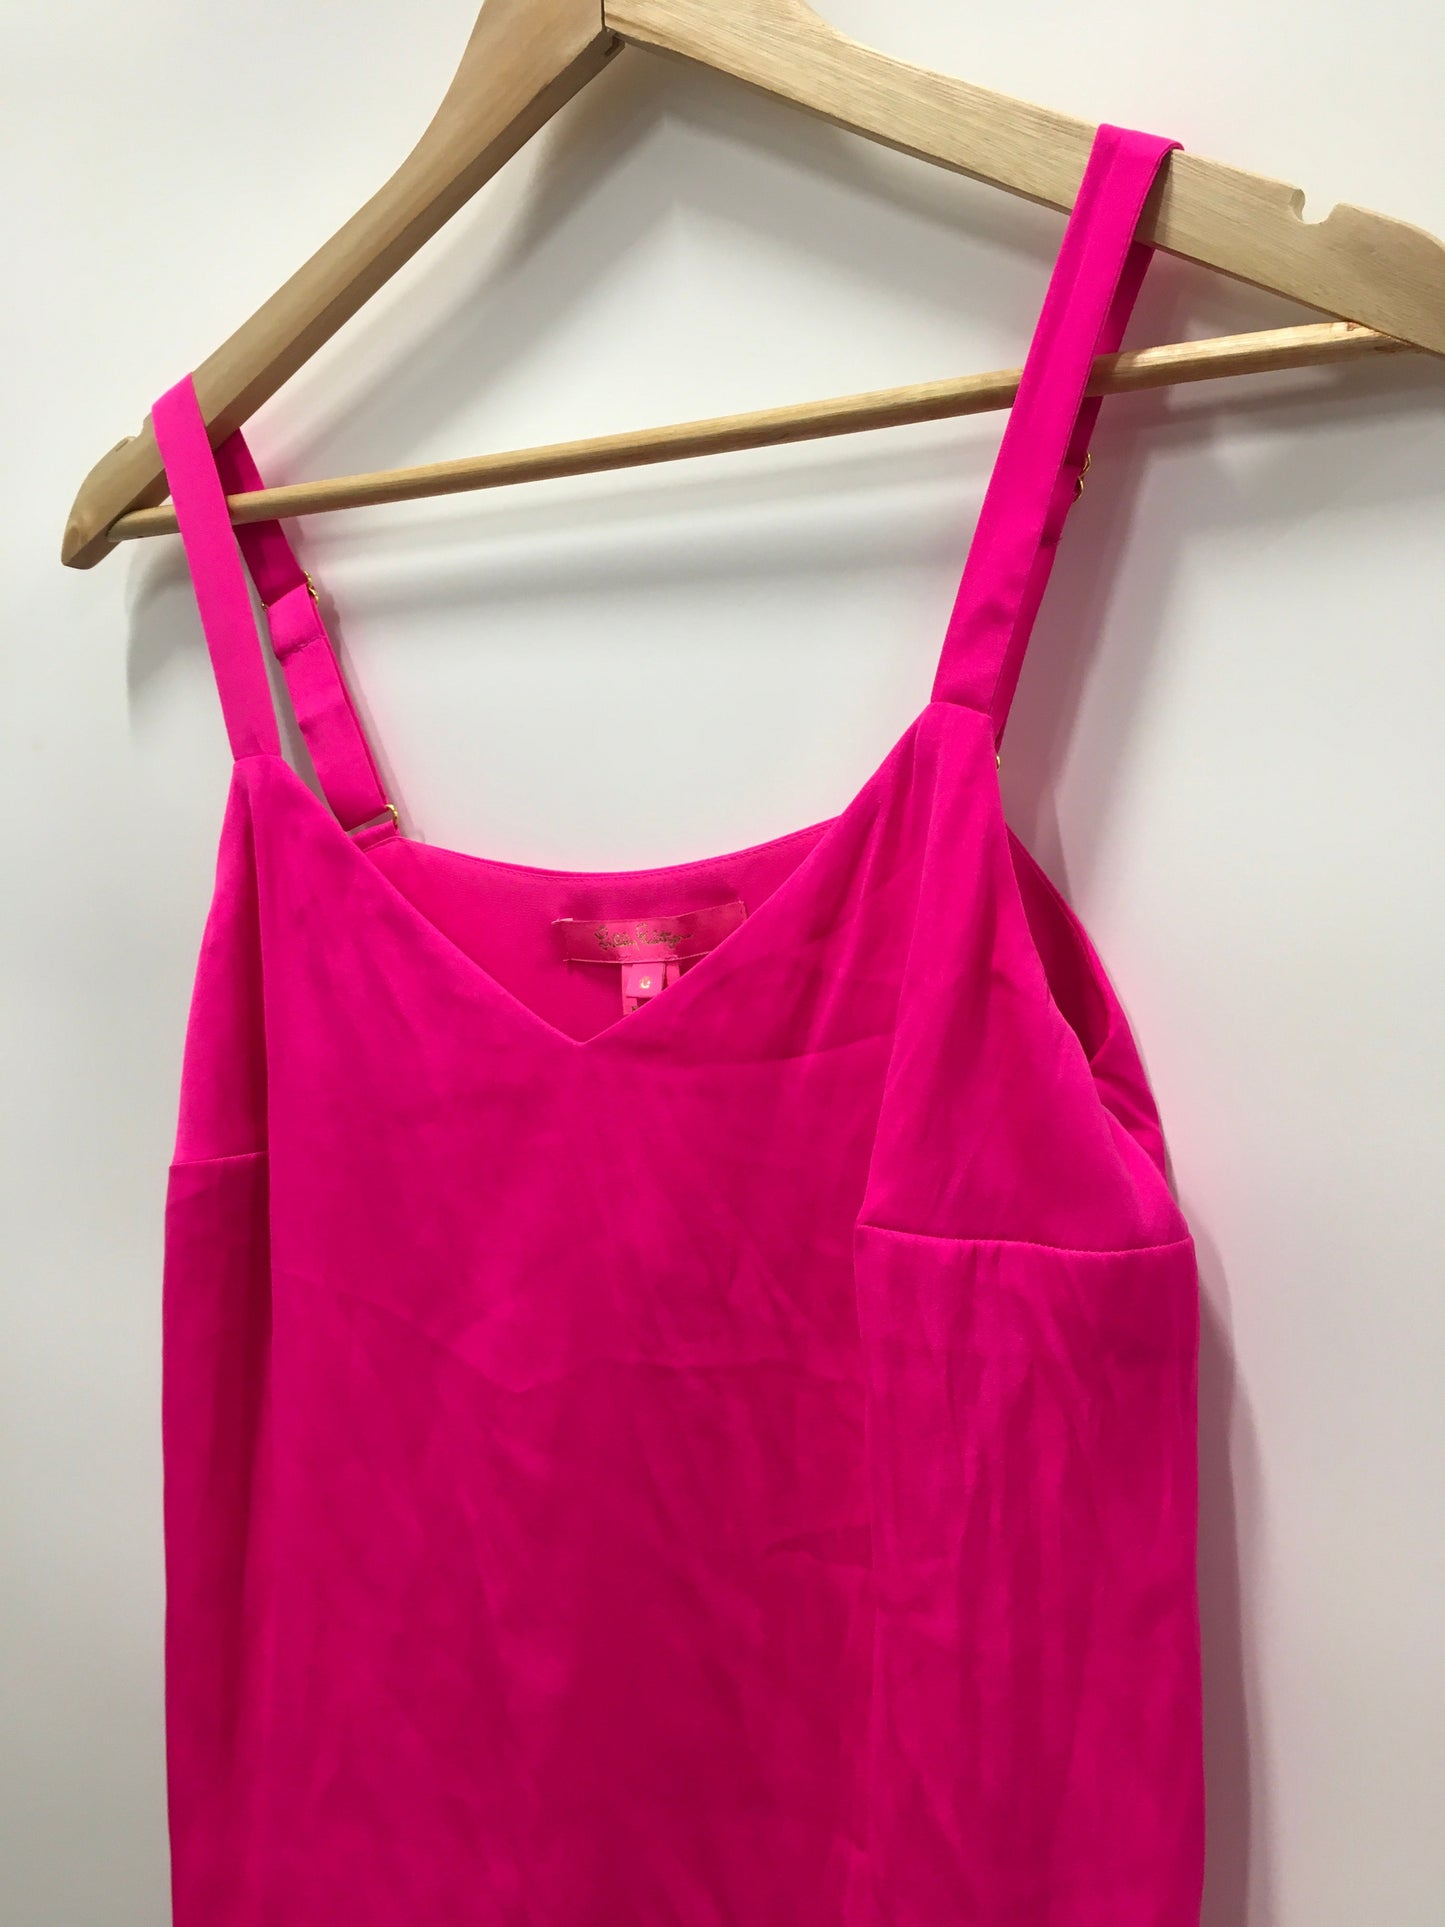 Pink Top Sleeveless Basic Lilly Pulitzer, Size 0